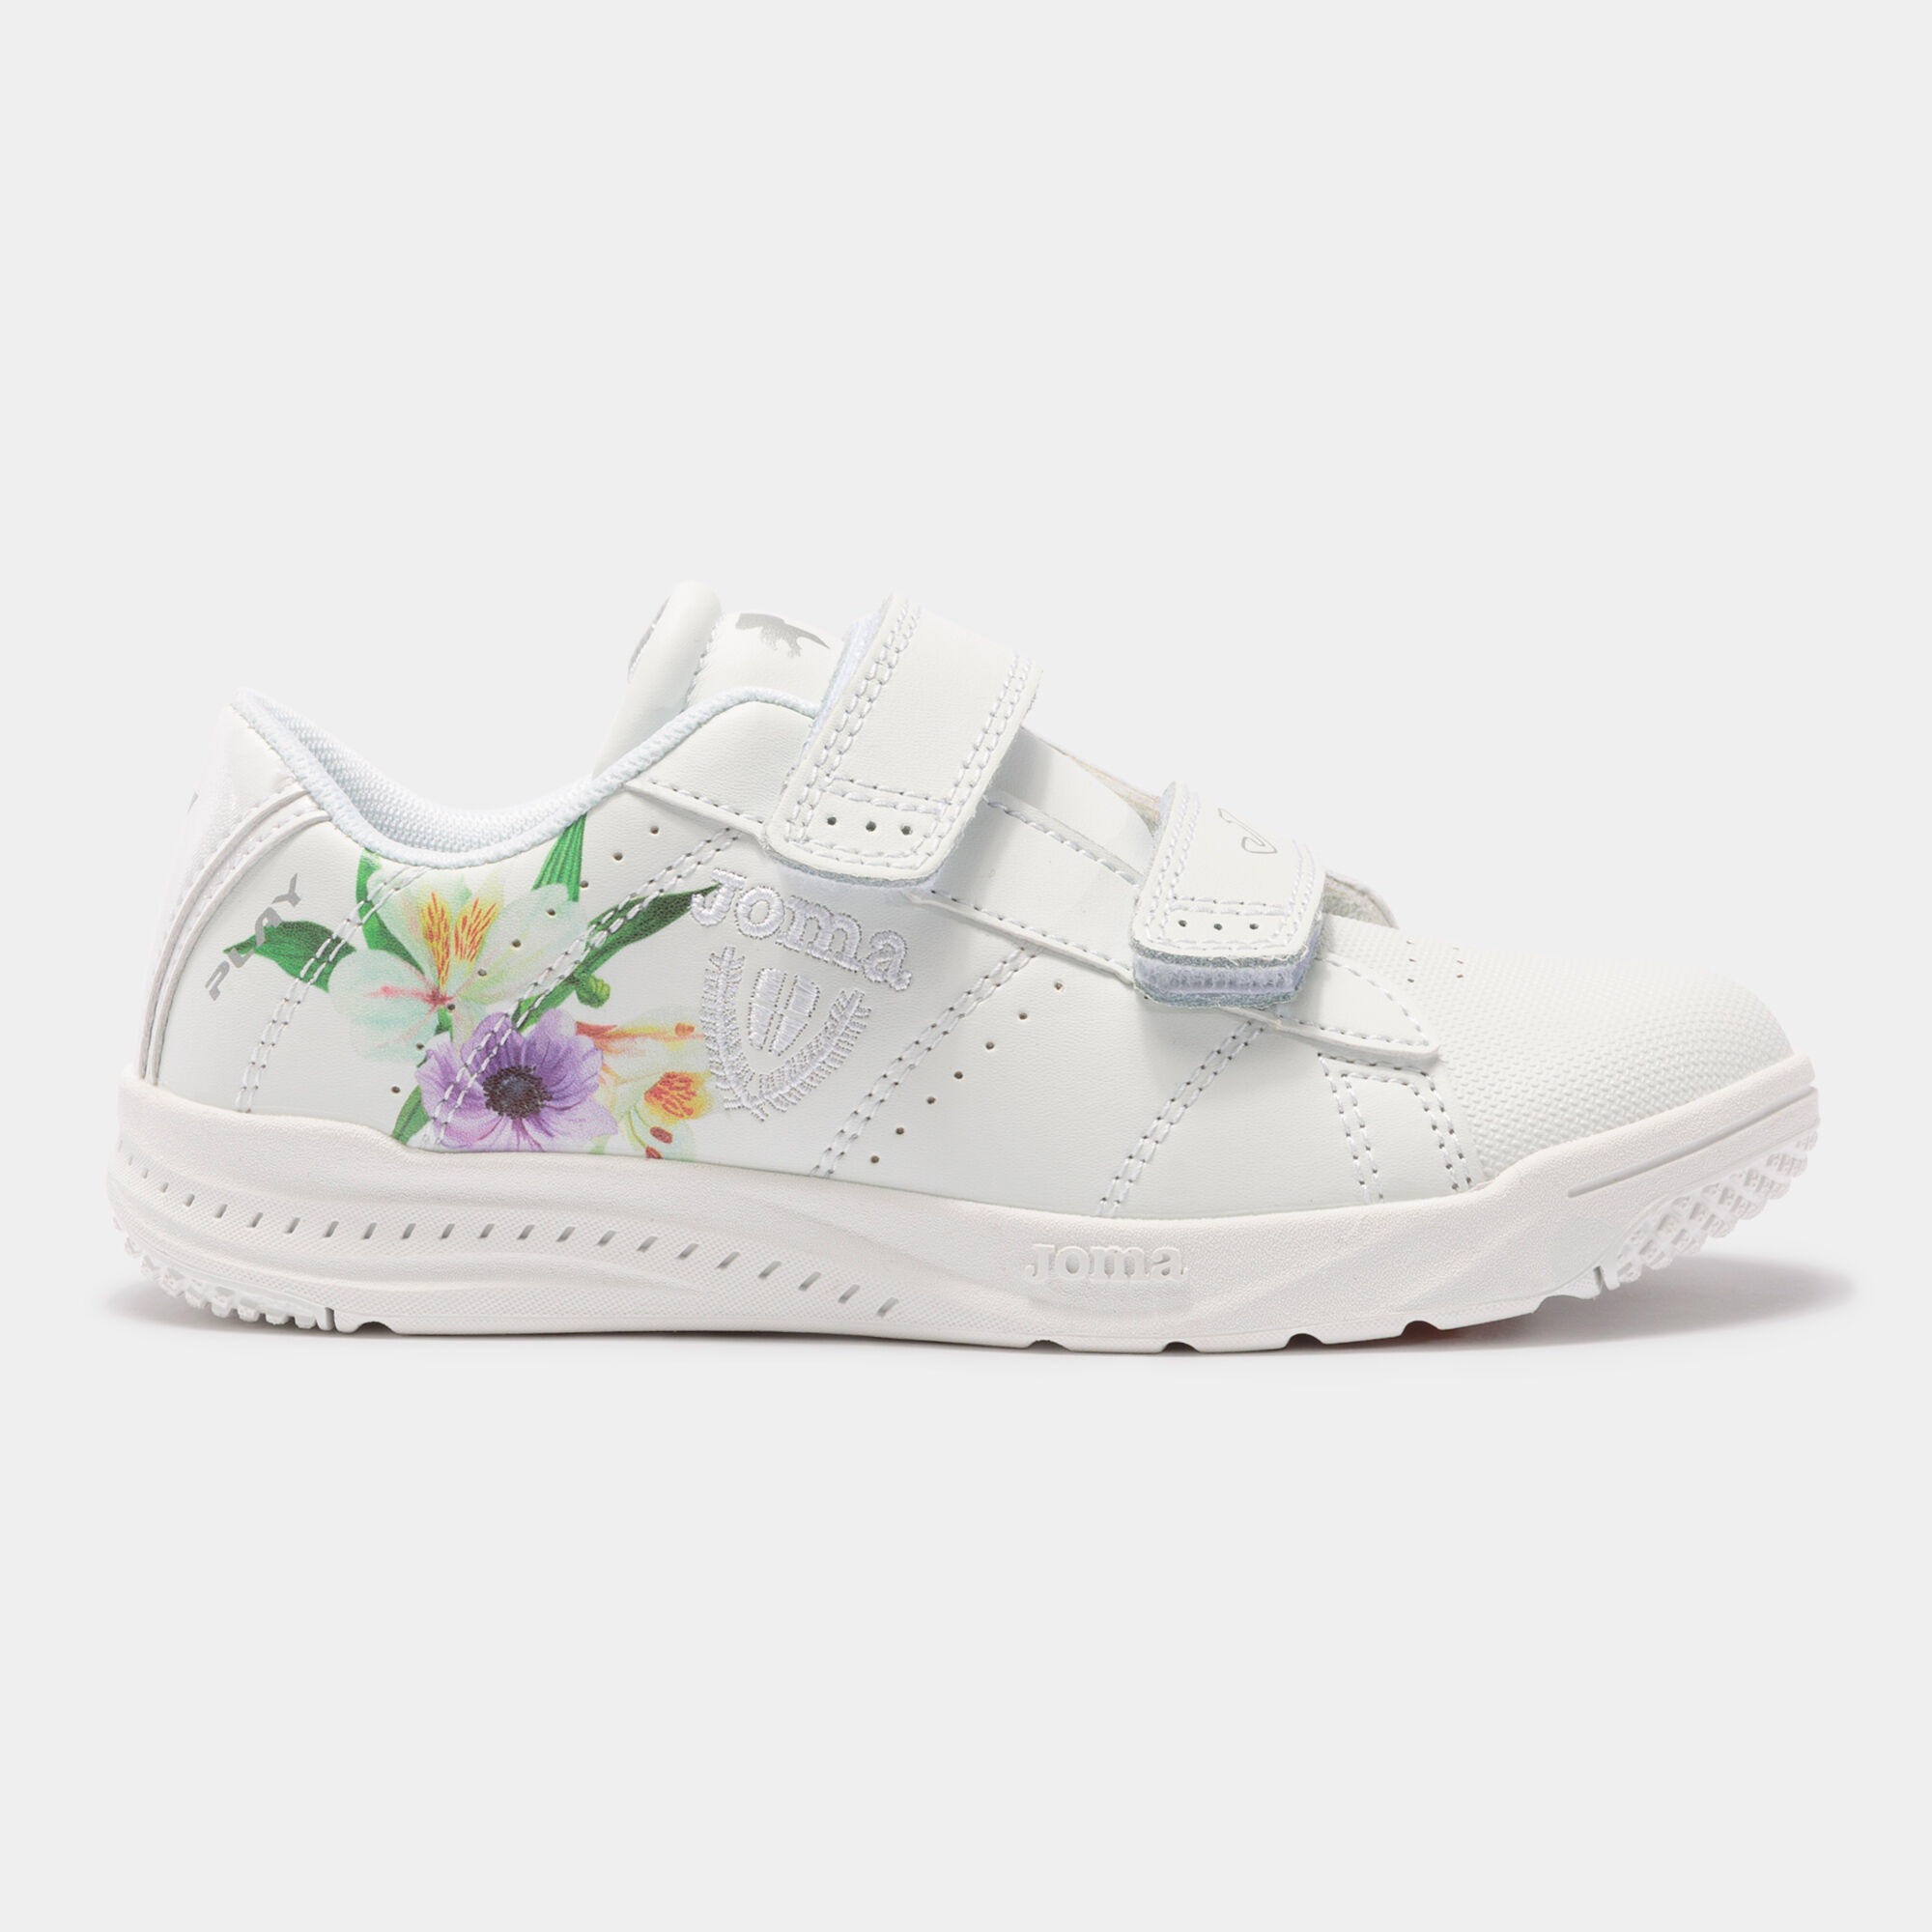 CHAUSSURES CASUAL PLAY 21 JUNIOR BLANC